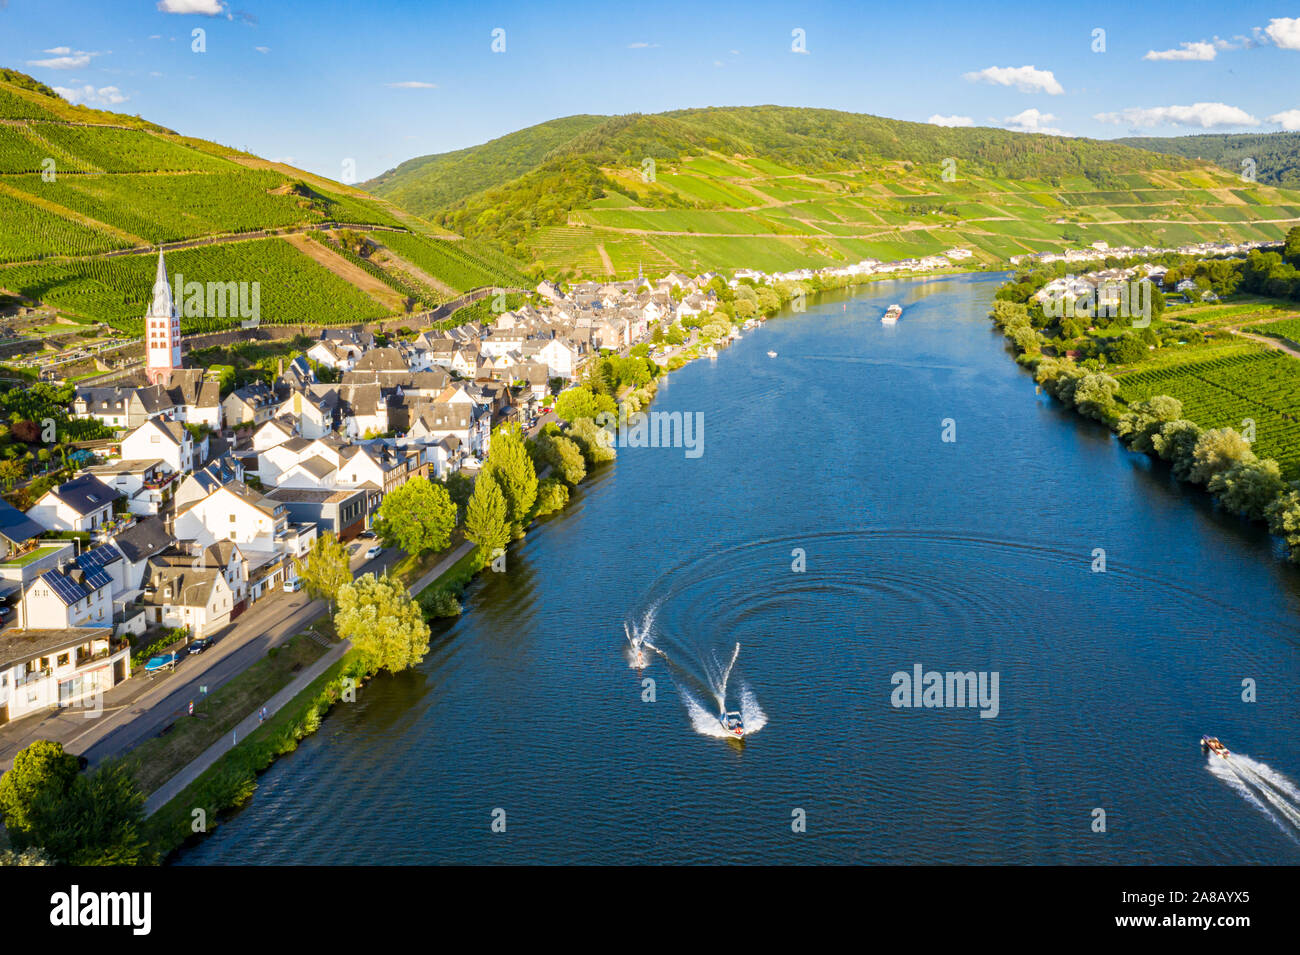 Hills with vineyards and church in Merl village of Zell (Mosel) town, Rhineland-Palatinate, Germany. Water skiing, barges, speedboats on the Moselle r Stock Photo